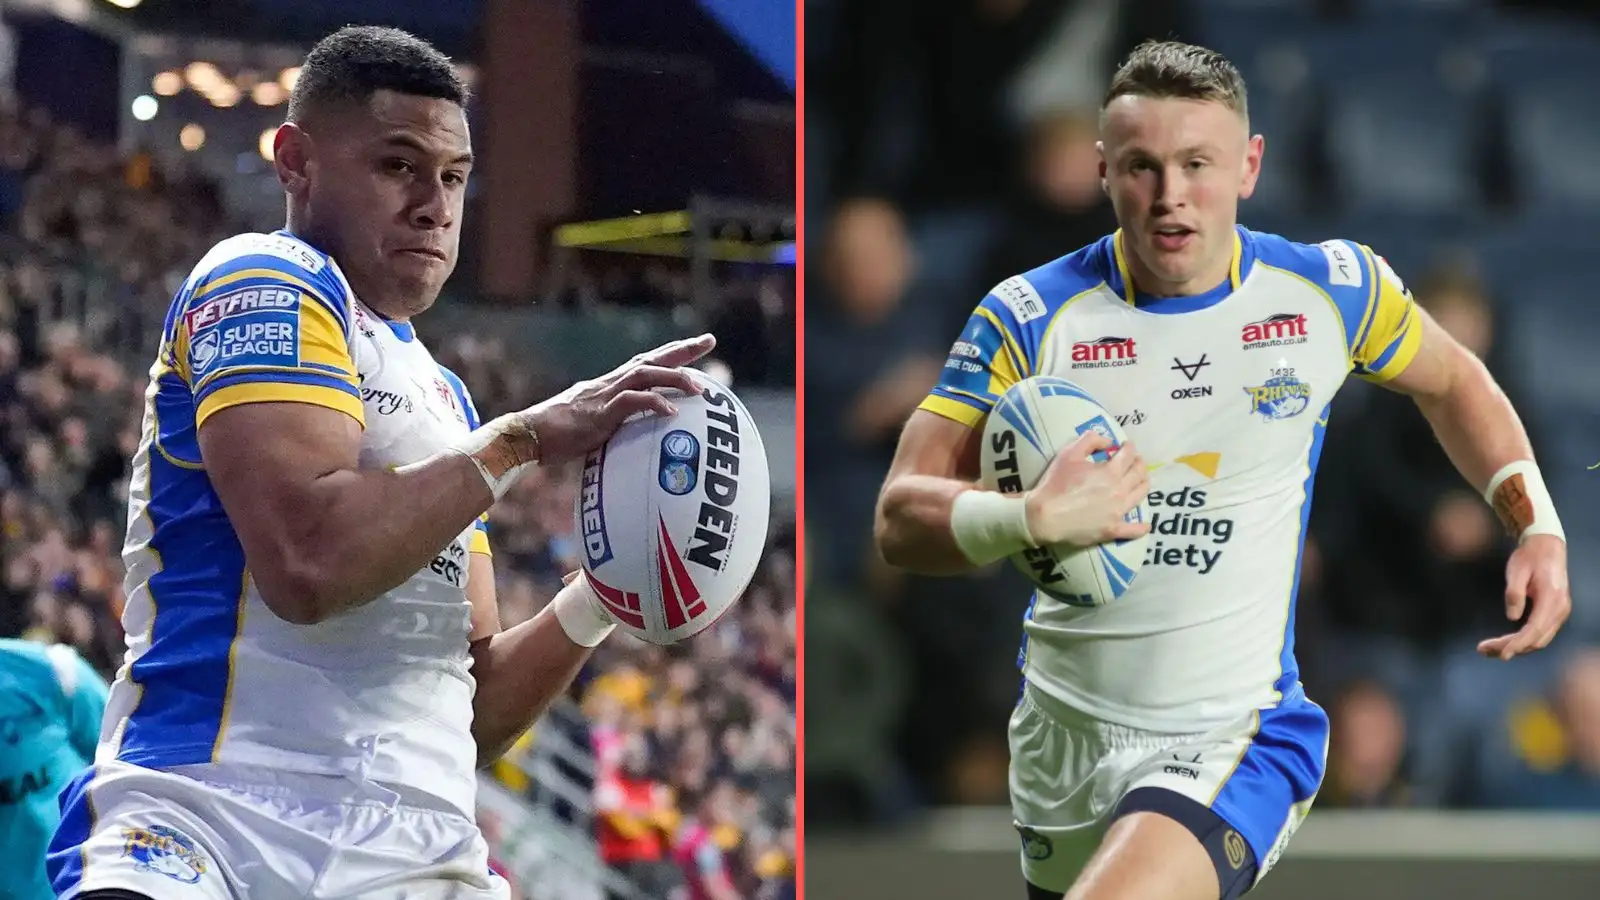 Leeds Rhinos coach details injuries which forced duo off in Huddersfield Giants defeat